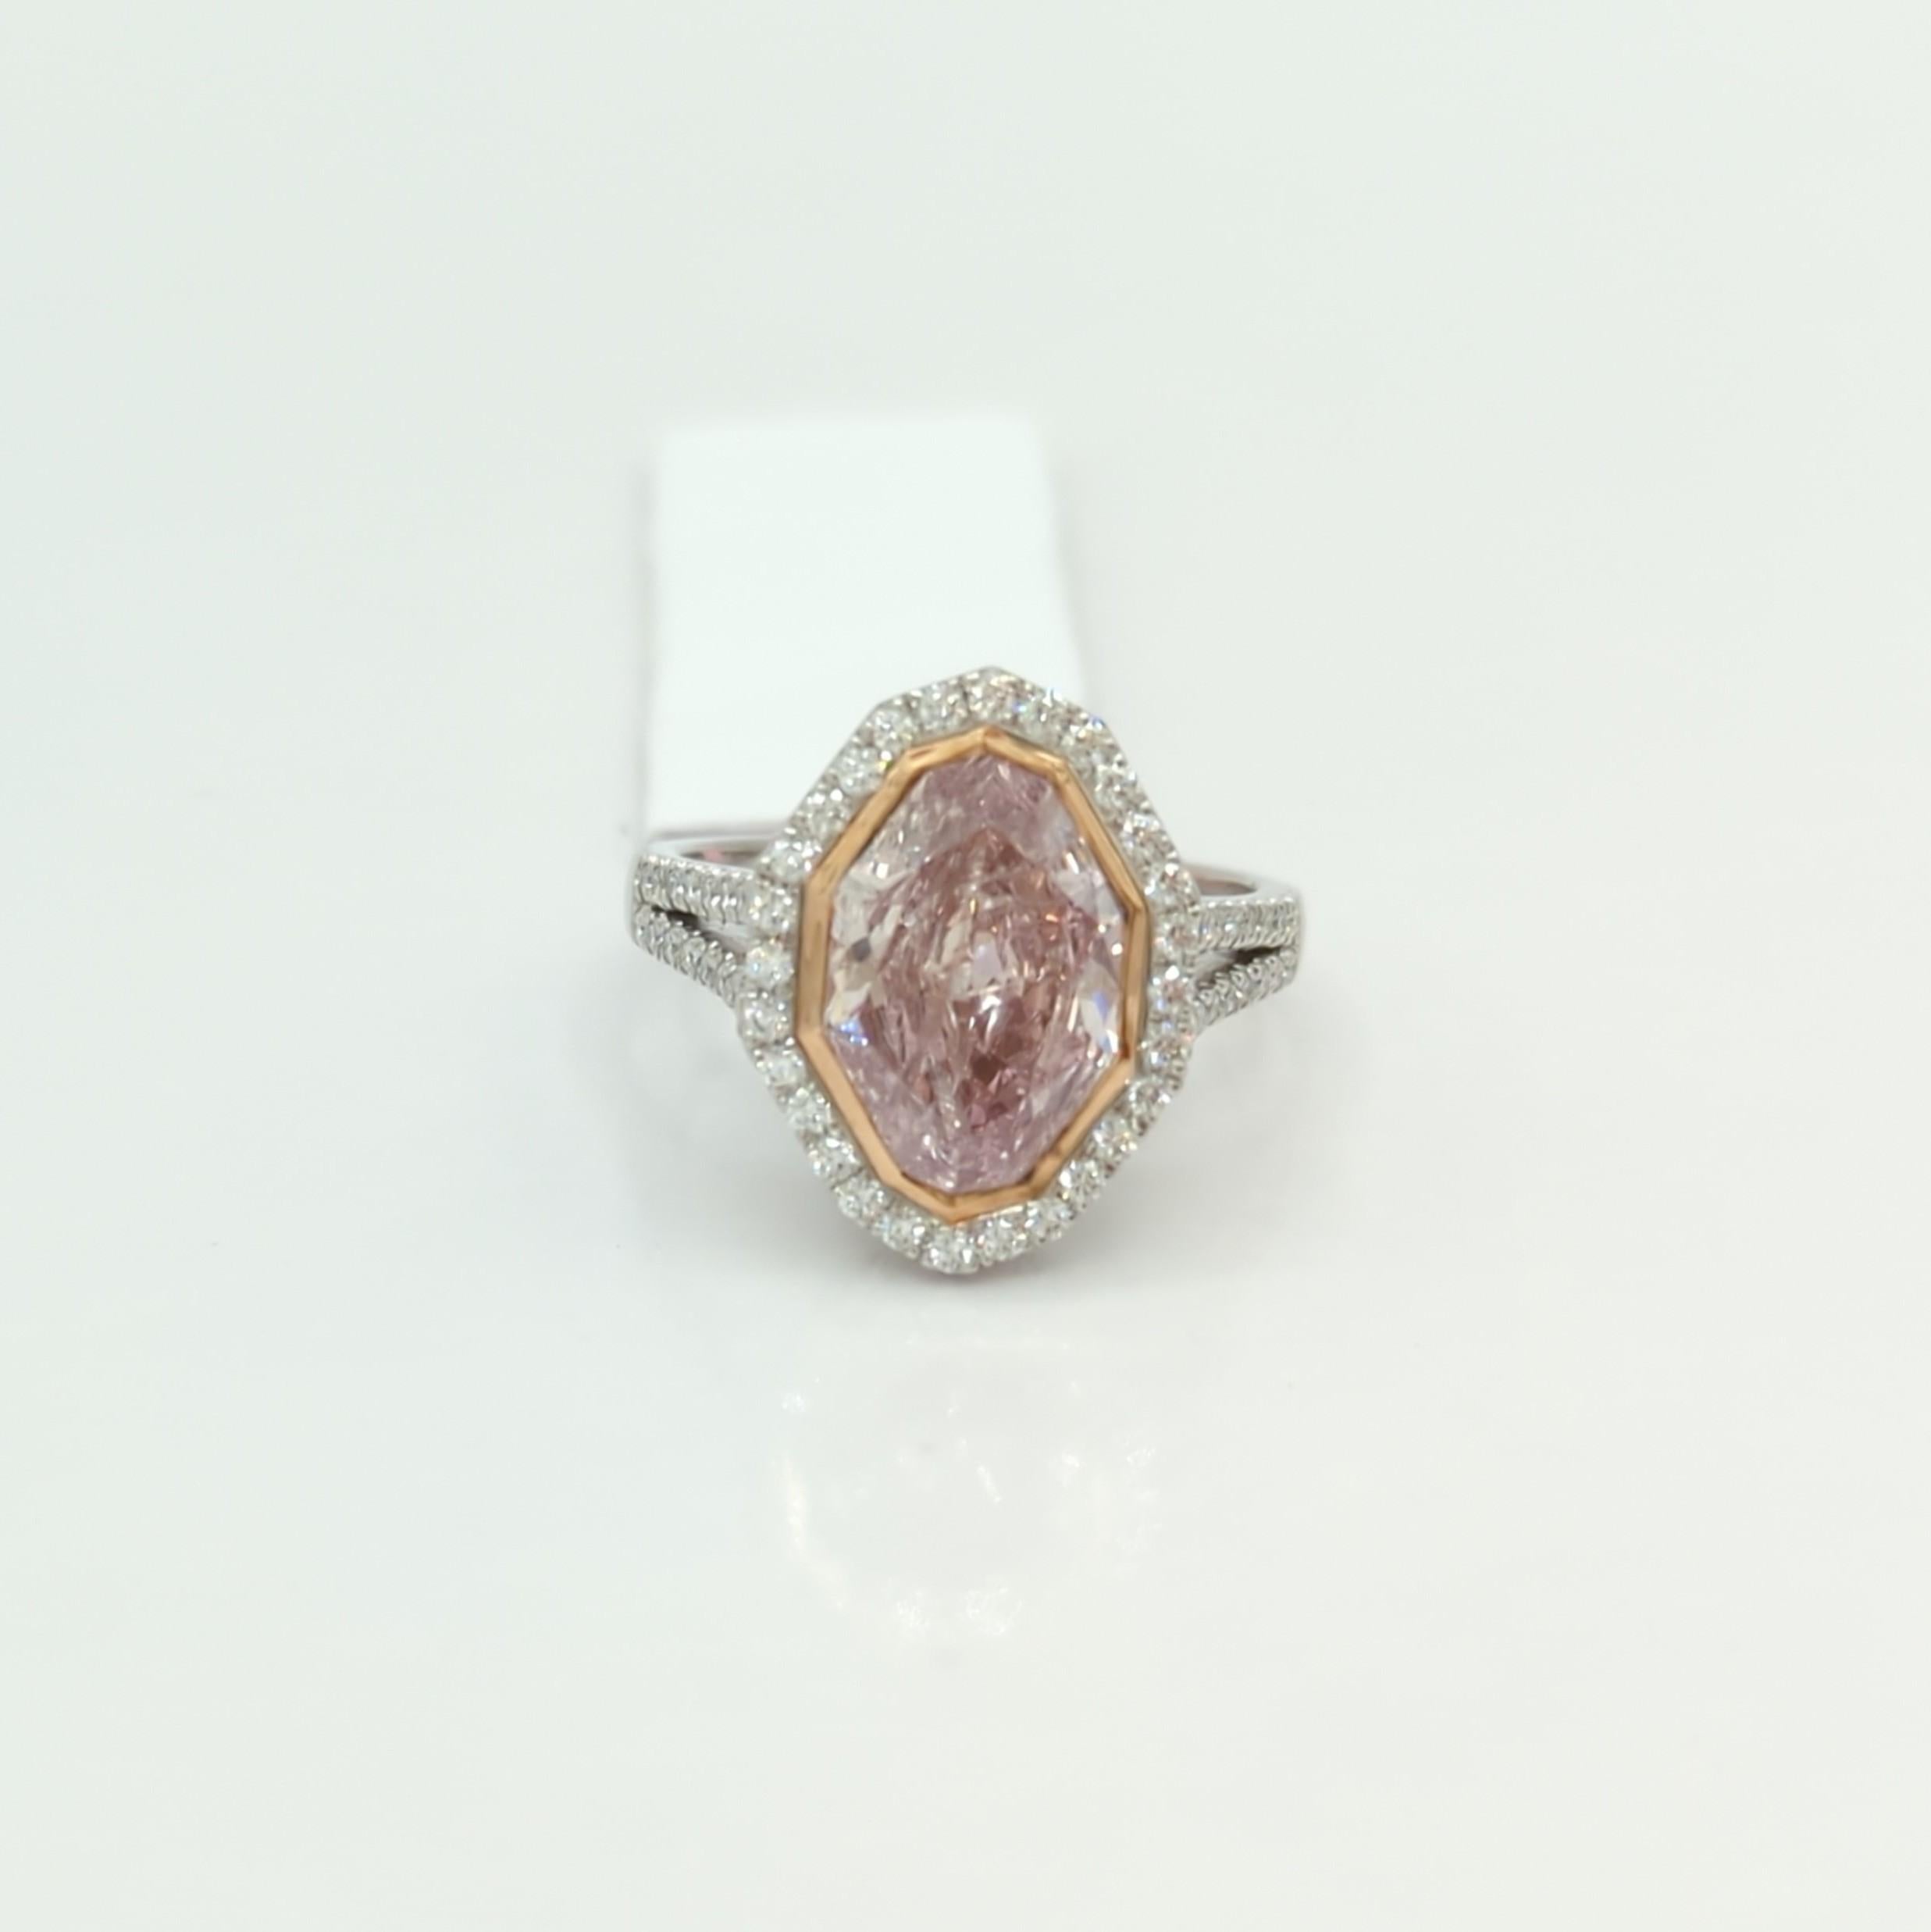 Absolutely stunning GIA 3.06 ct. fancy pink diamond marquise with 0.50 ct. good quality white diamond rounds.  Handmade in platinum and 18k rose gold.  Ring size 8+.  GIA certificate included.